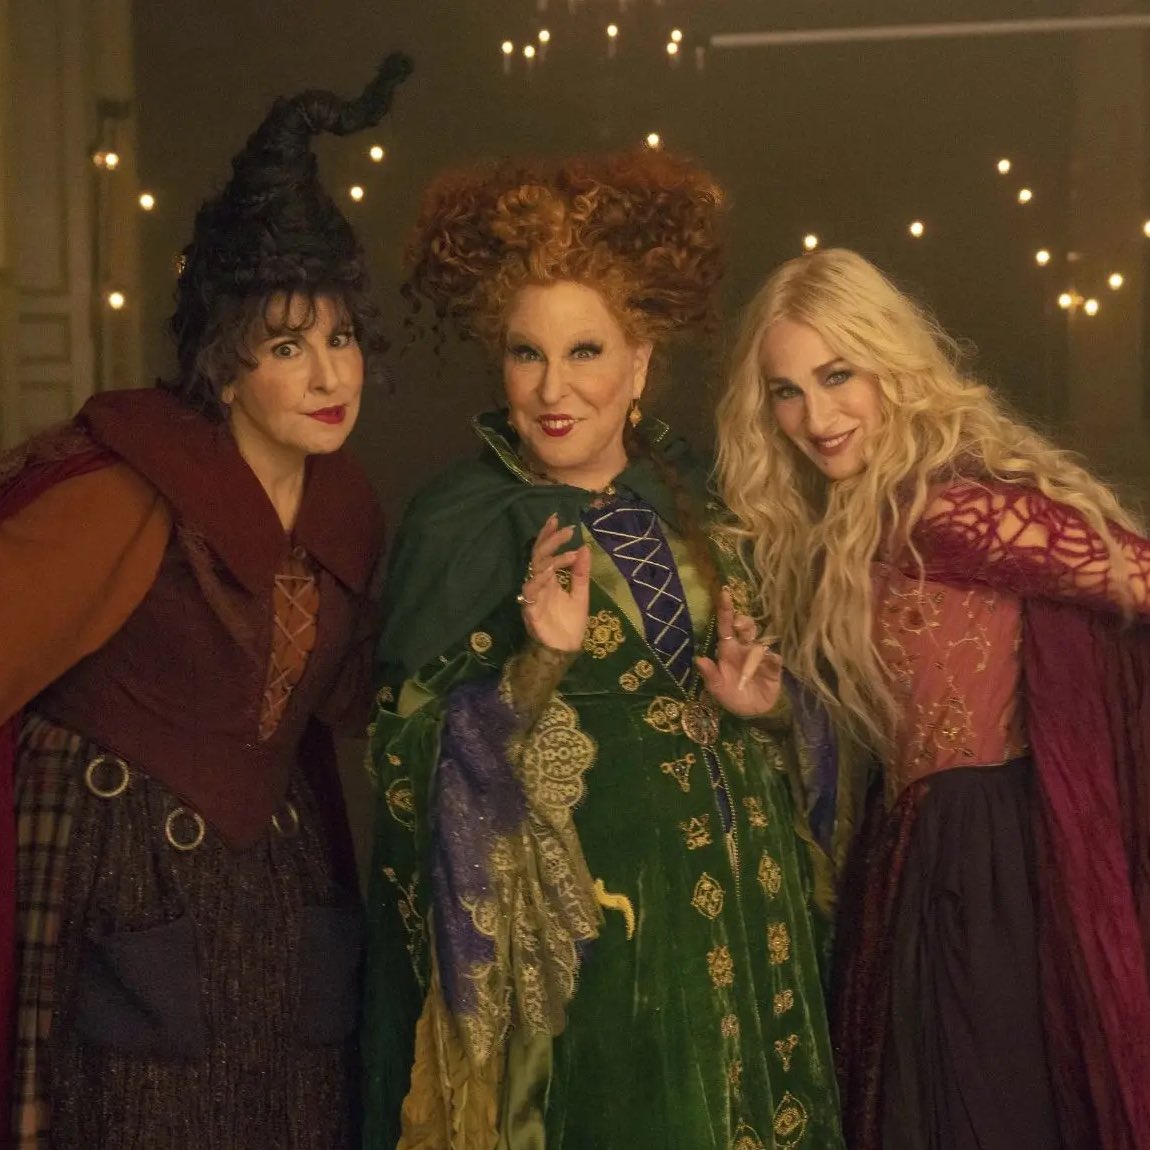 ‘Hocus Pocus 3’ is officially happening.